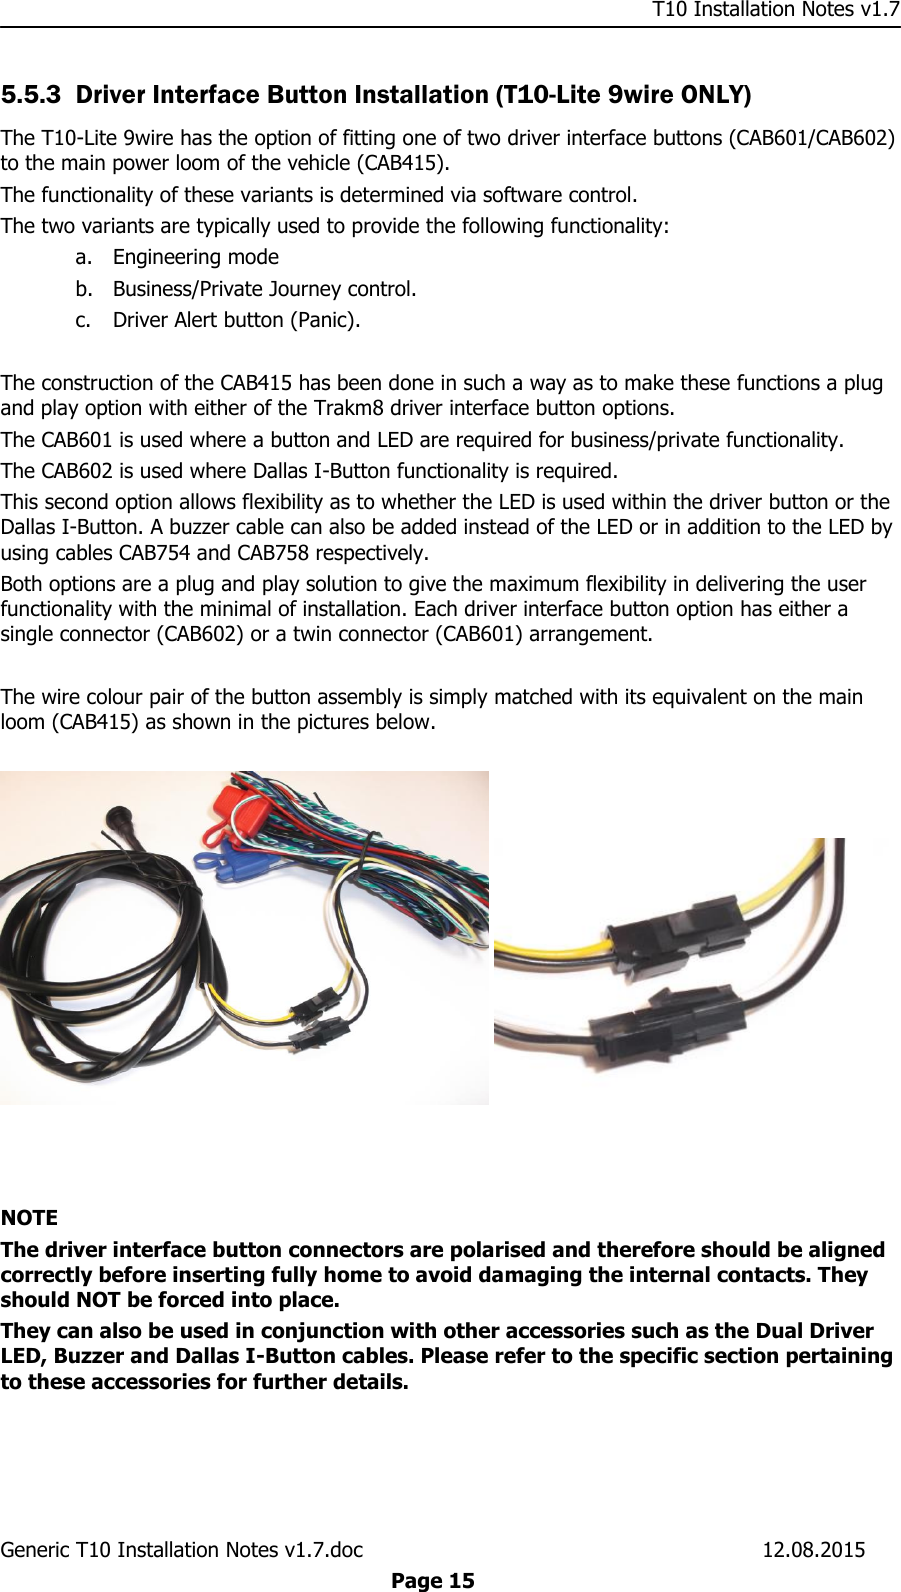     T10 Installation Notes v1.7 Generic T10 Installation Notes v1.7.doc    12.08.2015  Page 15 5.5.3 Driver Interface Button Installation (T10-Lite 9wire ONLY) The T10-Lite 9wire has the option of fitting one of two driver interface buttons (CAB601/CAB602) to the main power loom of the vehicle (CAB415).  The functionality of these variants is determined via software control.  The two variants are typically used to provide the following functionality: a. Engineering mode b. Business/Private Journey control. c. Driver Alert button (Panic).  The construction of the CAB415 has been done in such a way as to make these functions a plug and play option with either of the Trakm8 driver interface button options. The CAB601 is used where a button and LED are required for business/private functionality. The CAB602 is used where Dallas I-Button functionality is required.  This second option allows flexibility as to whether the LED is used within the driver button or the Dallas I-Button. A buzzer cable can also be added instead of the LED or in addition to the LED by using cables CAB754 and CAB758 respectively. Both options are a plug and play solution to give the maximum flexibility in delivering the user functionality with the minimal of installation. Each driver interface button option has either a single connector (CAB602) or a twin connector (CAB601) arrangement.  The wire colour pair of the button assembly is simply matched with its equivalent on the main loom (CAB415) as shown in the pictures below.        NOTE The driver interface button connectors are polarised and therefore should be aligned correctly before inserting fully home to avoid damaging the internal contacts. They should NOT be forced into place. They can also be used in conjunction with other accessories such as the Dual Driver LED, Buzzer and Dallas I-Button cables. Please refer to the specific section pertaining to these accessories for further details.  